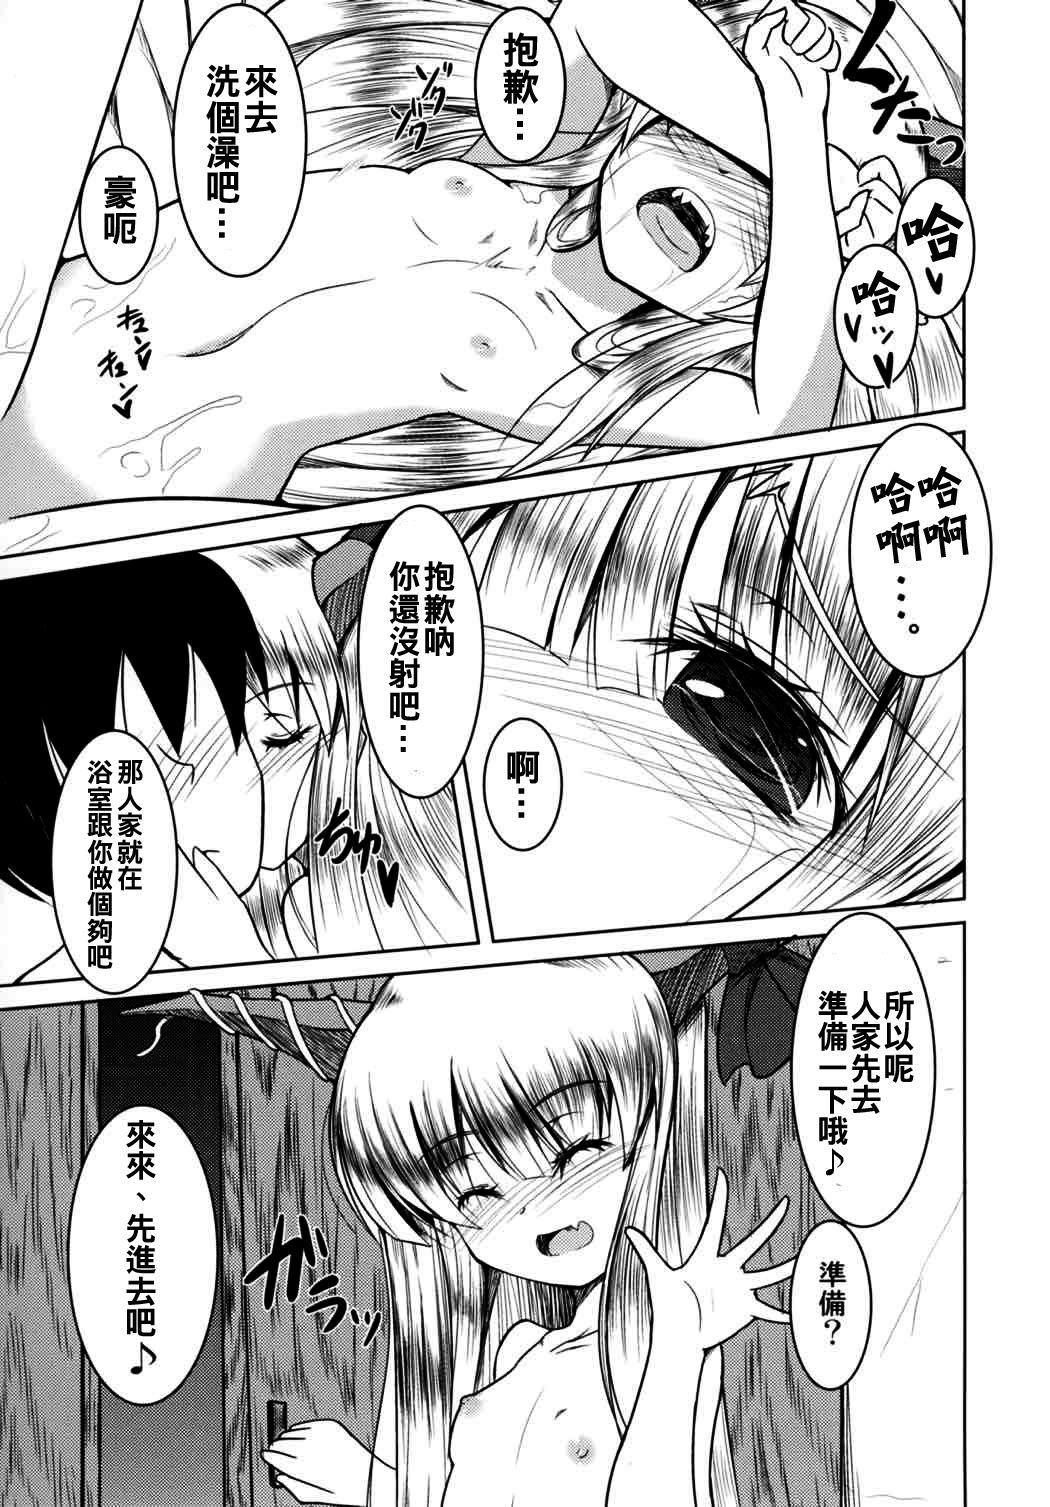 Mom Oniyome Love Love HaramaSex - Touhou project Letsdoeit - Page 11